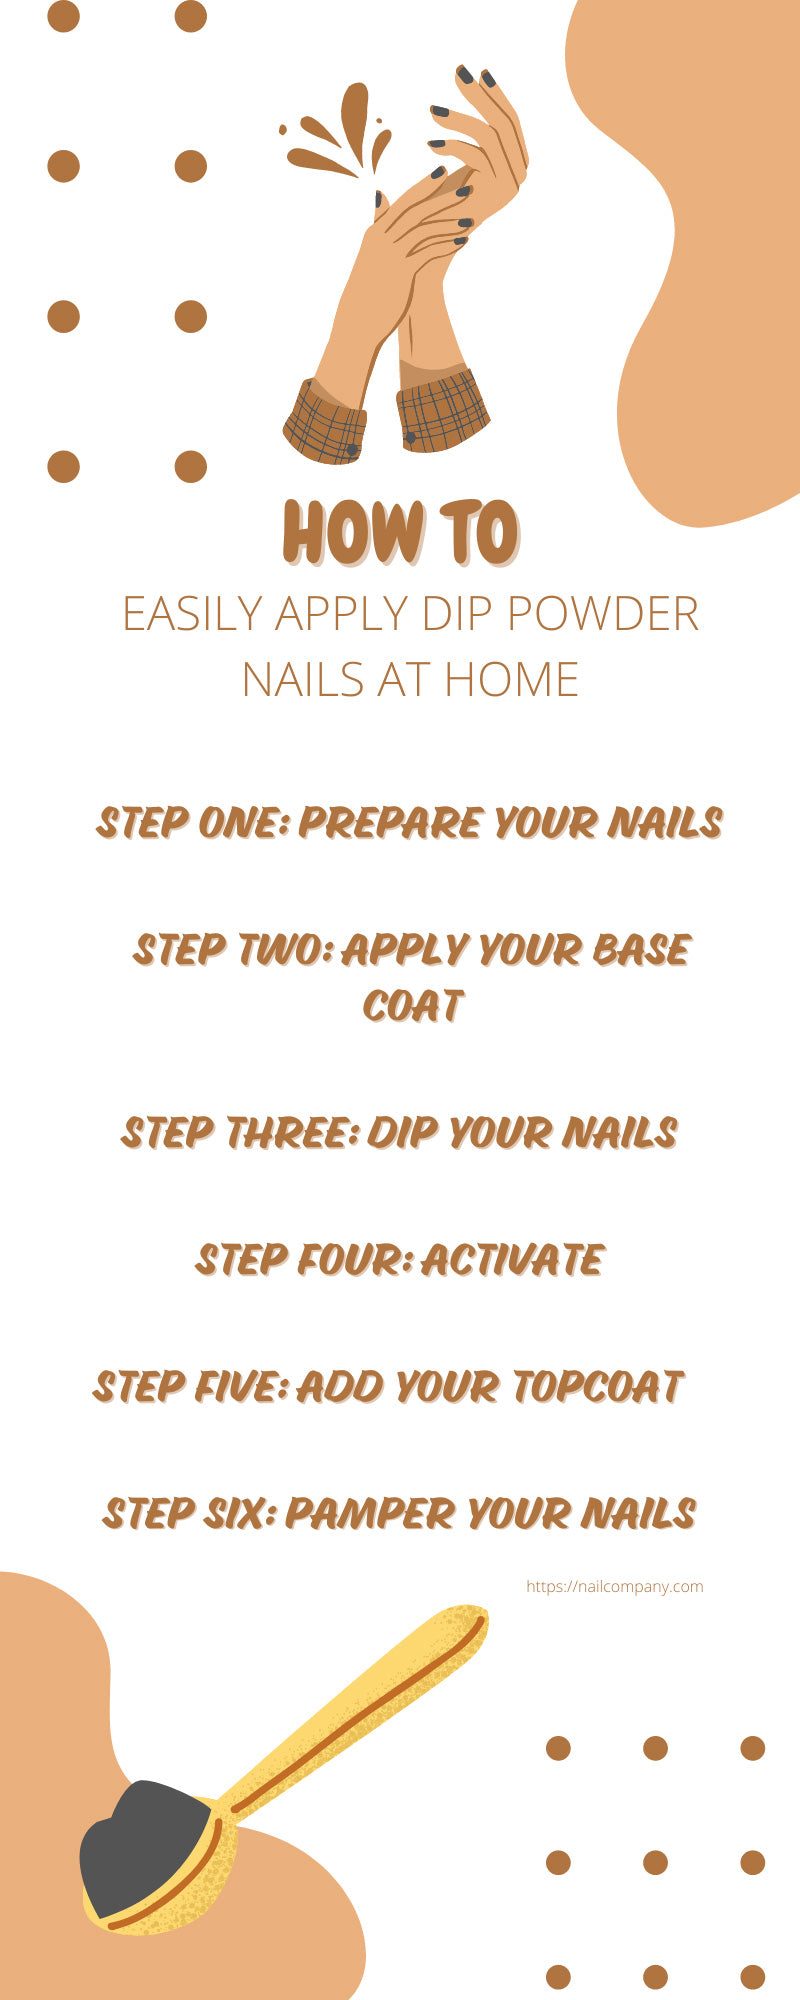 How To Easily Apply Dip Powder Nails at Home